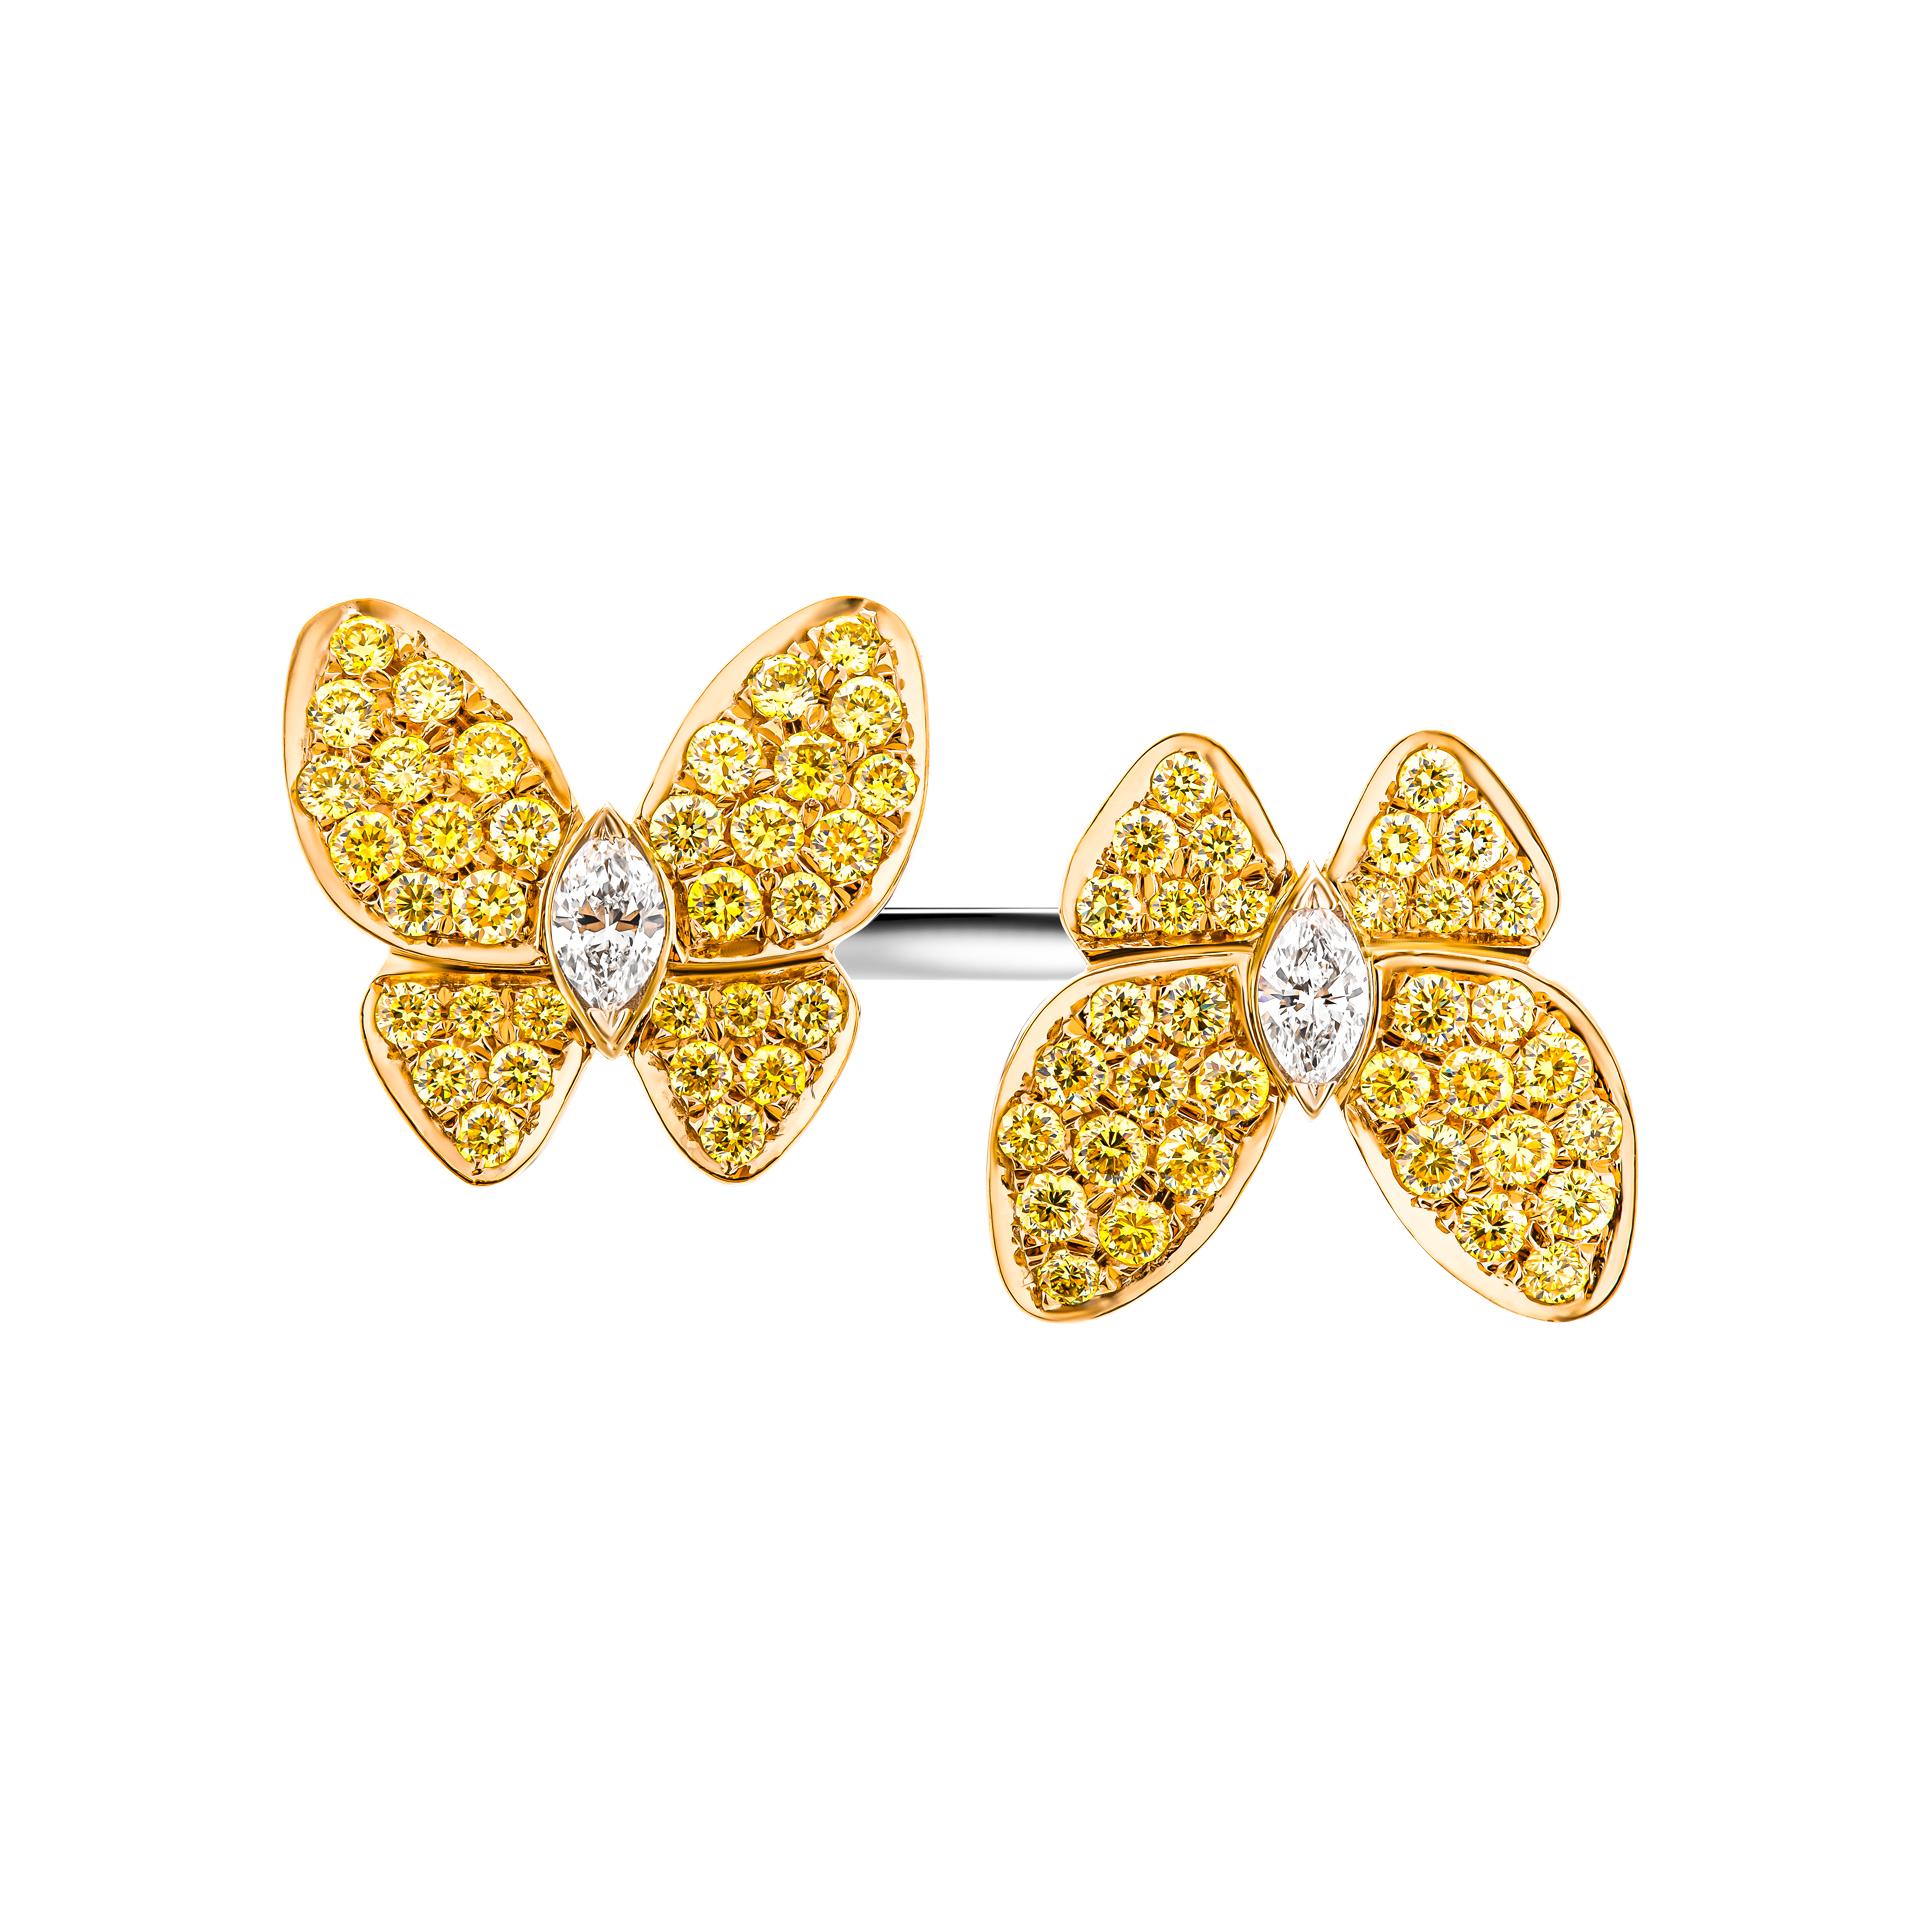 Butterfly ring in 18K Yellow gold & 18K White Gold With 
Total Carat Weight of yellow pave: 1.36ct 
Marquee diamond: 0.47ct 
Size: 7 ¼